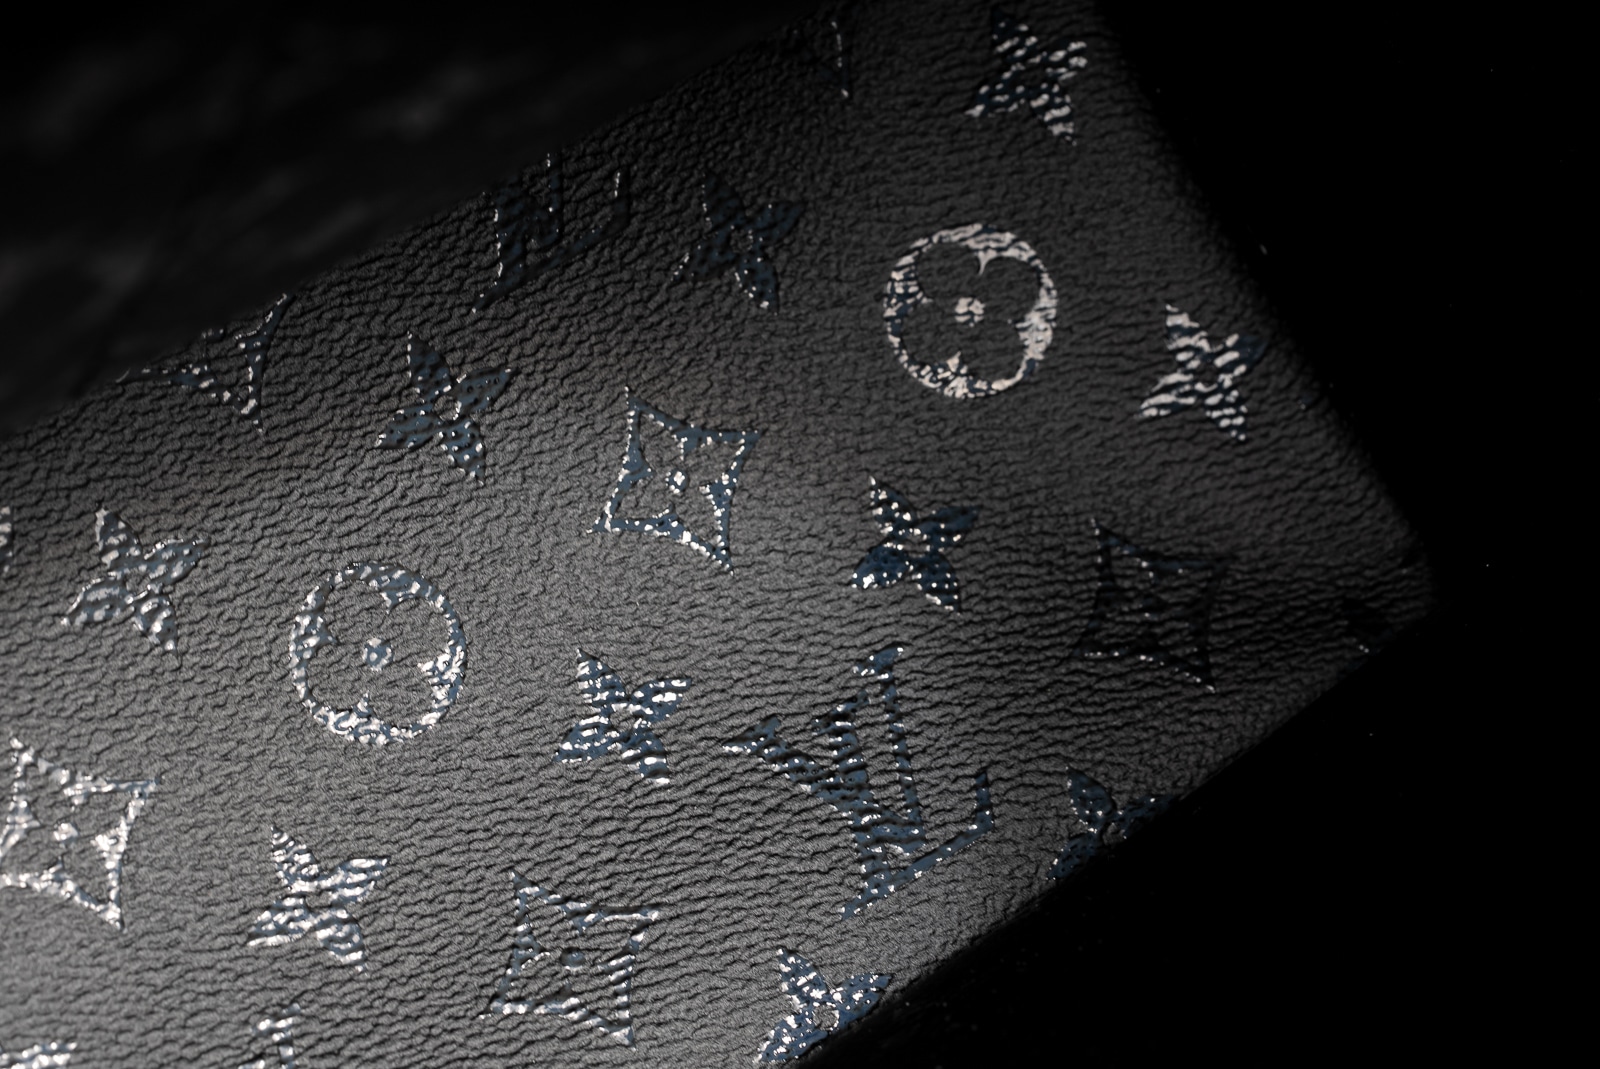 Louis Vuitton Teamed Up With Urs Fischer on Leather Goods Line